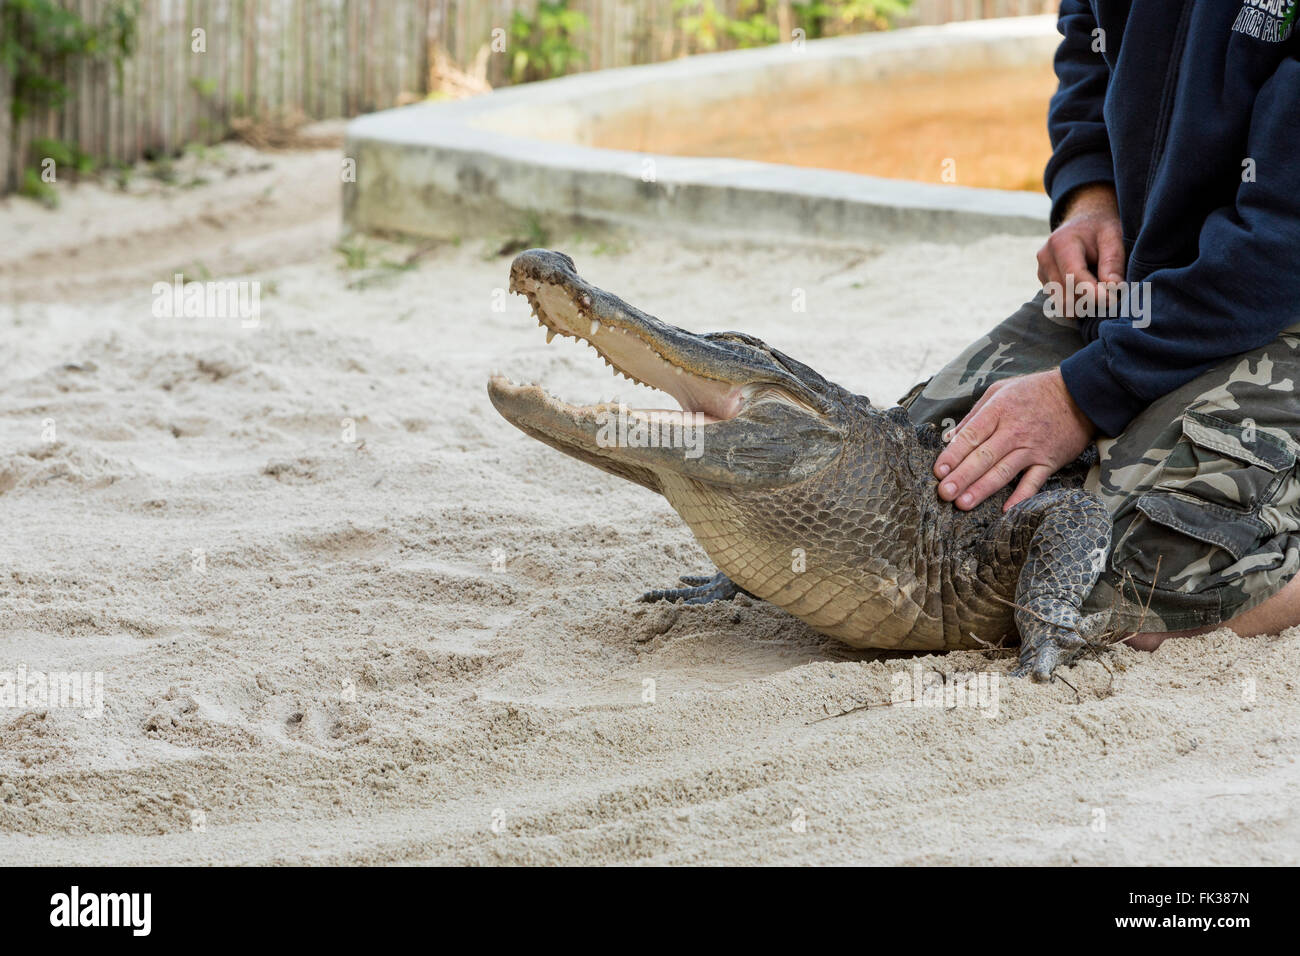 Person performing a performace with alligator in the Florida Everglades. Stock Photo